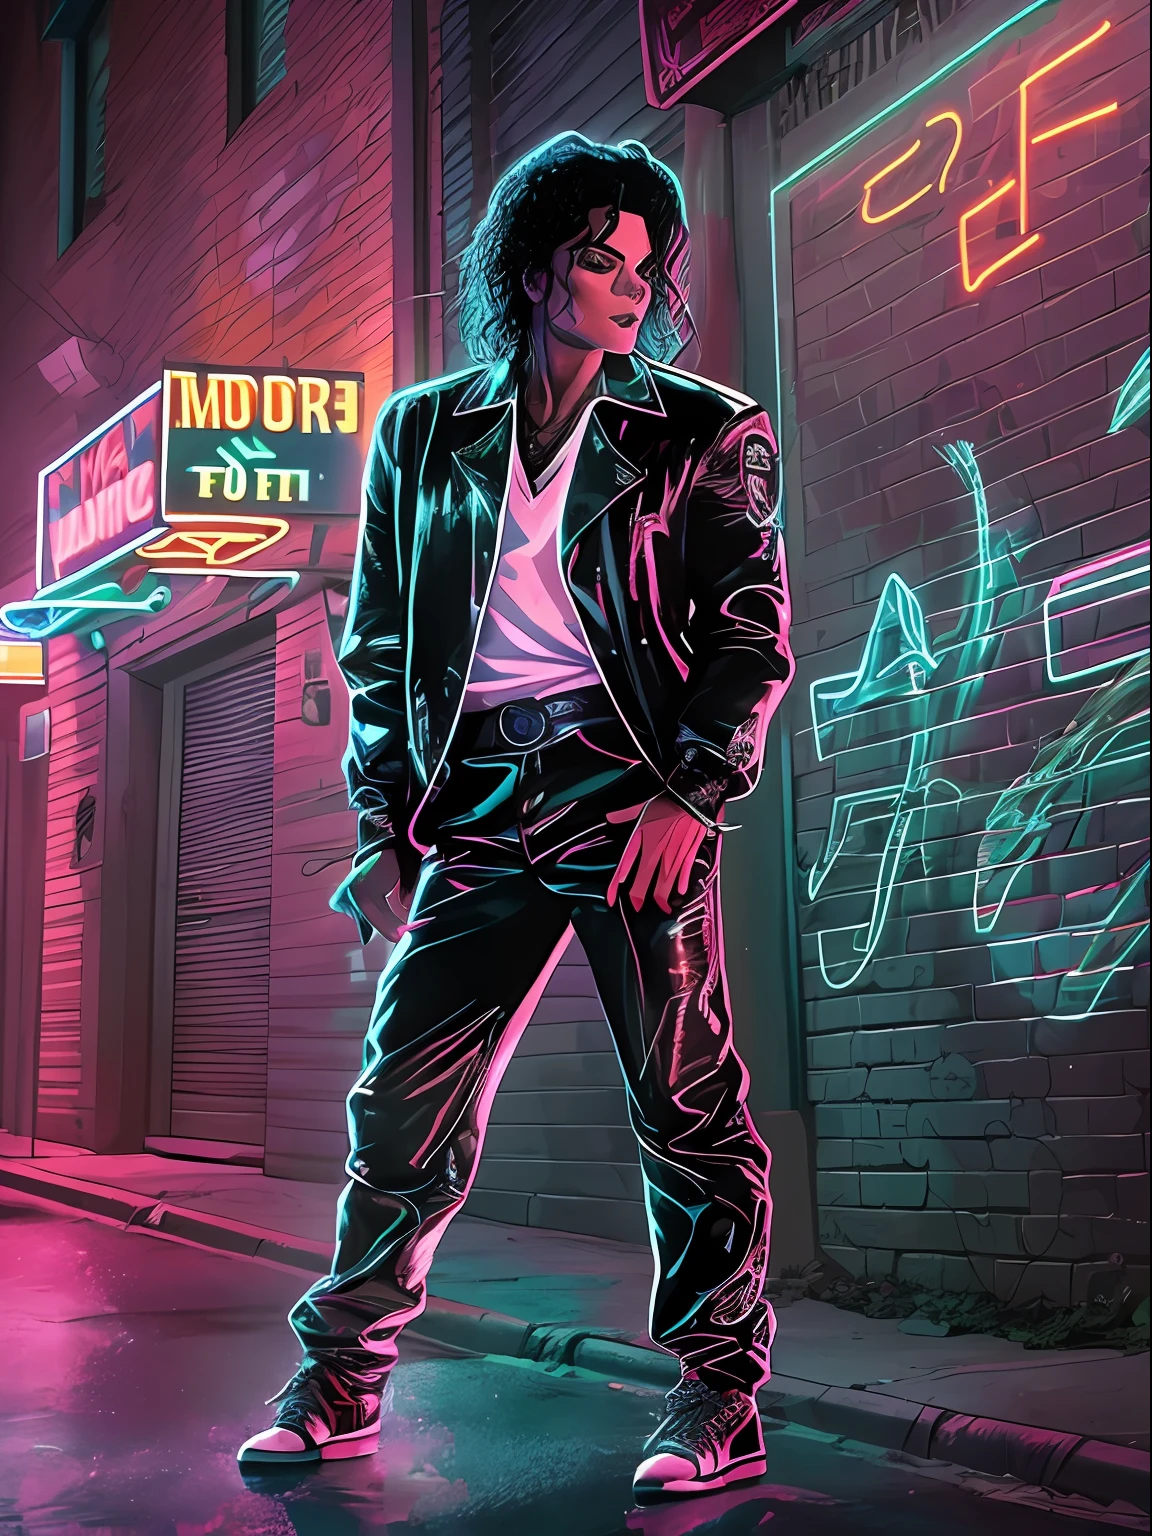 A stylized image of Michael Jackson in his iconic outfit from the Billie Jean music video, standing on a glowing sidewalk in a dark alleyway, surrounded by shadows and neon lights. Michael Jackson appears in the image, wearing his iconic outfit from the Billie Jean music video. He stands on a glowing sidewalk in a dark alleyway, surrounded by shadows and neon lights. The image is stylized, with bold lines and vibrant colors that capture the energy and mood of the music video